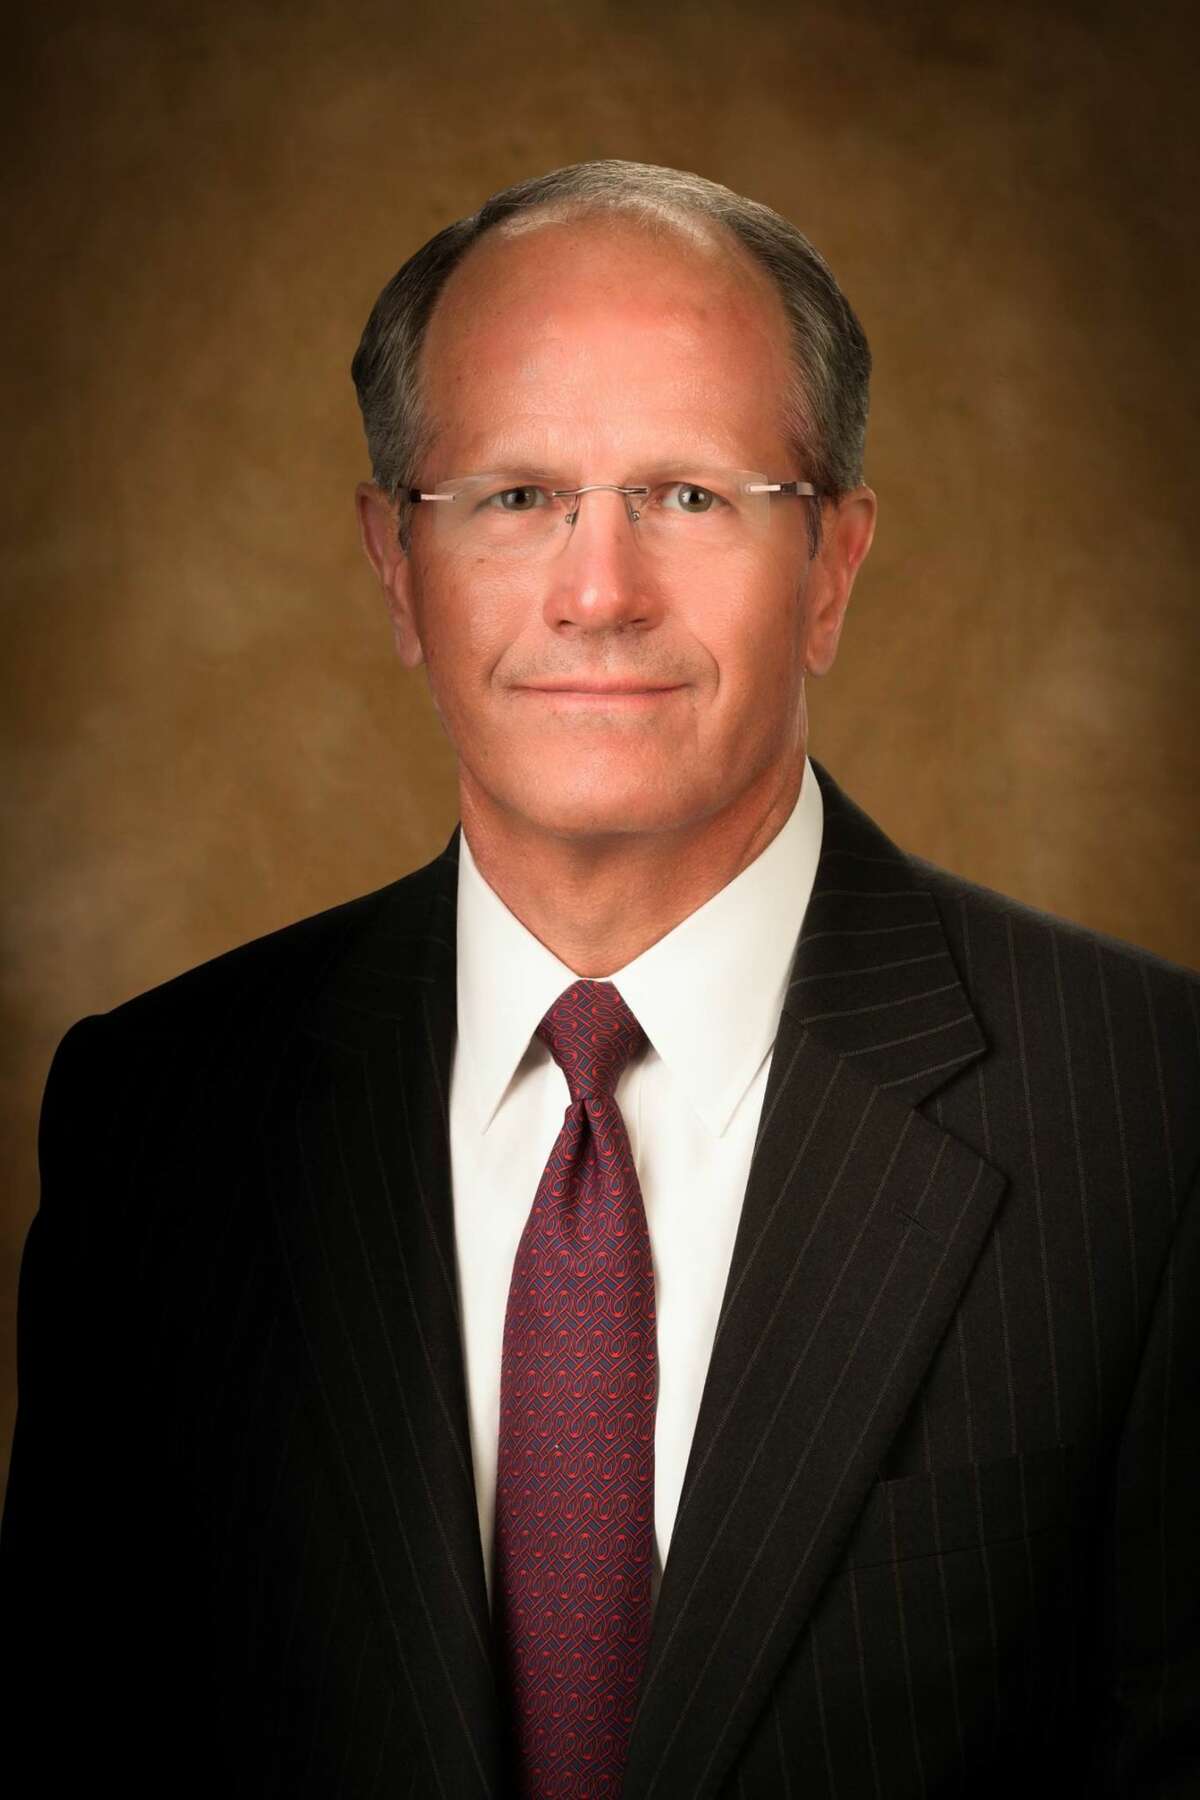 Don Cosby replaces Ken Burgess, who will remain as FirstCapital Bank’s chairman.